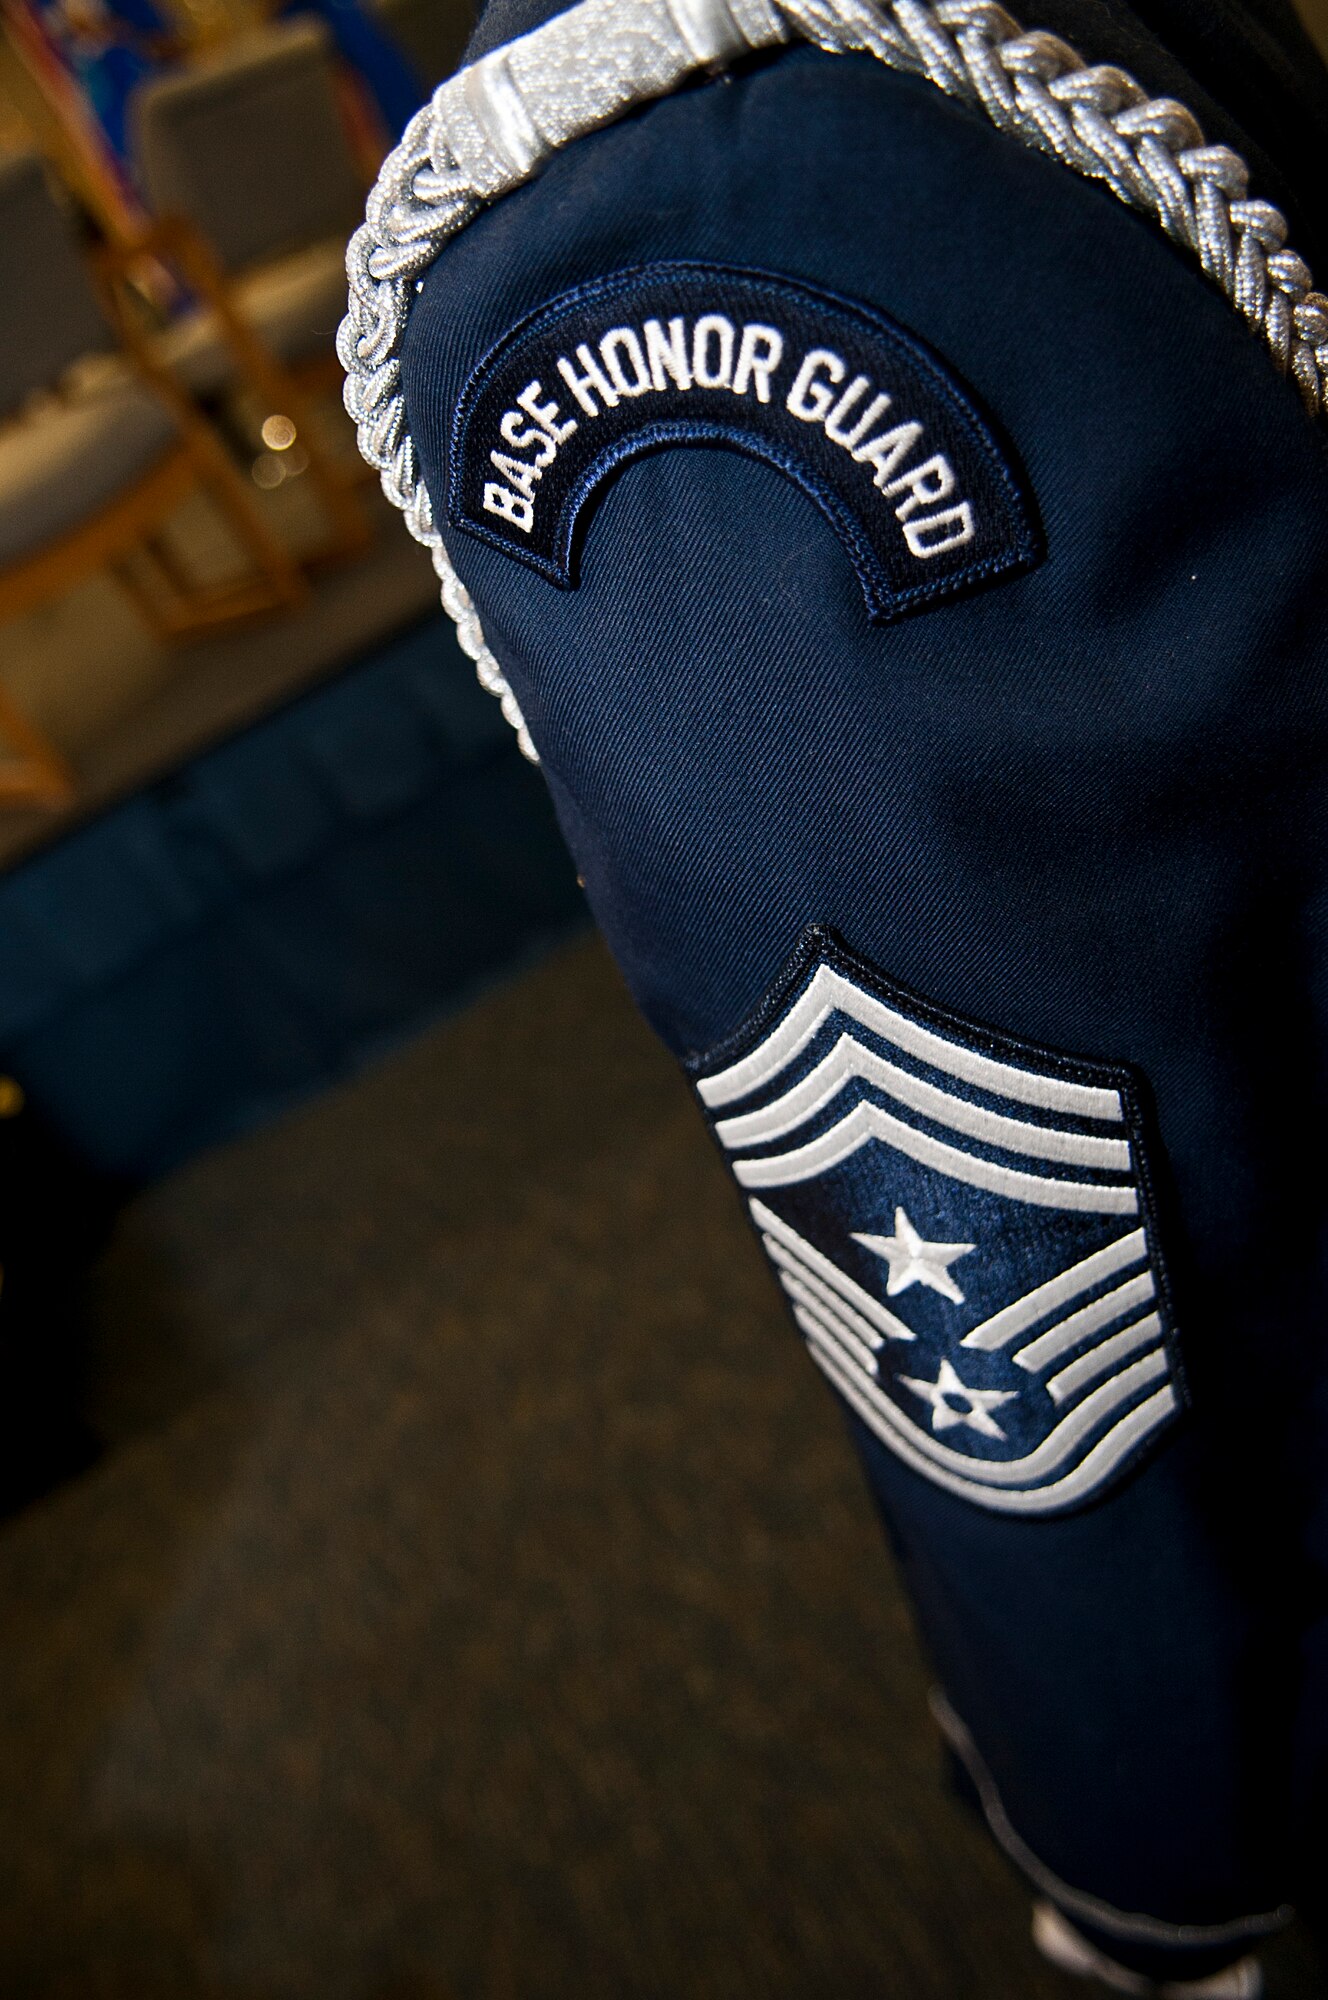 A Base Honor Guard ceremonial uniform is displayed at Minot Air Force Base, N.D., Sept. 29, 2016. Base Honor Guard members wear the ceremonial uniform every time they perform in a detail. (U.S. Air Force photo/Airman 1st Class Jonathan McElderry)